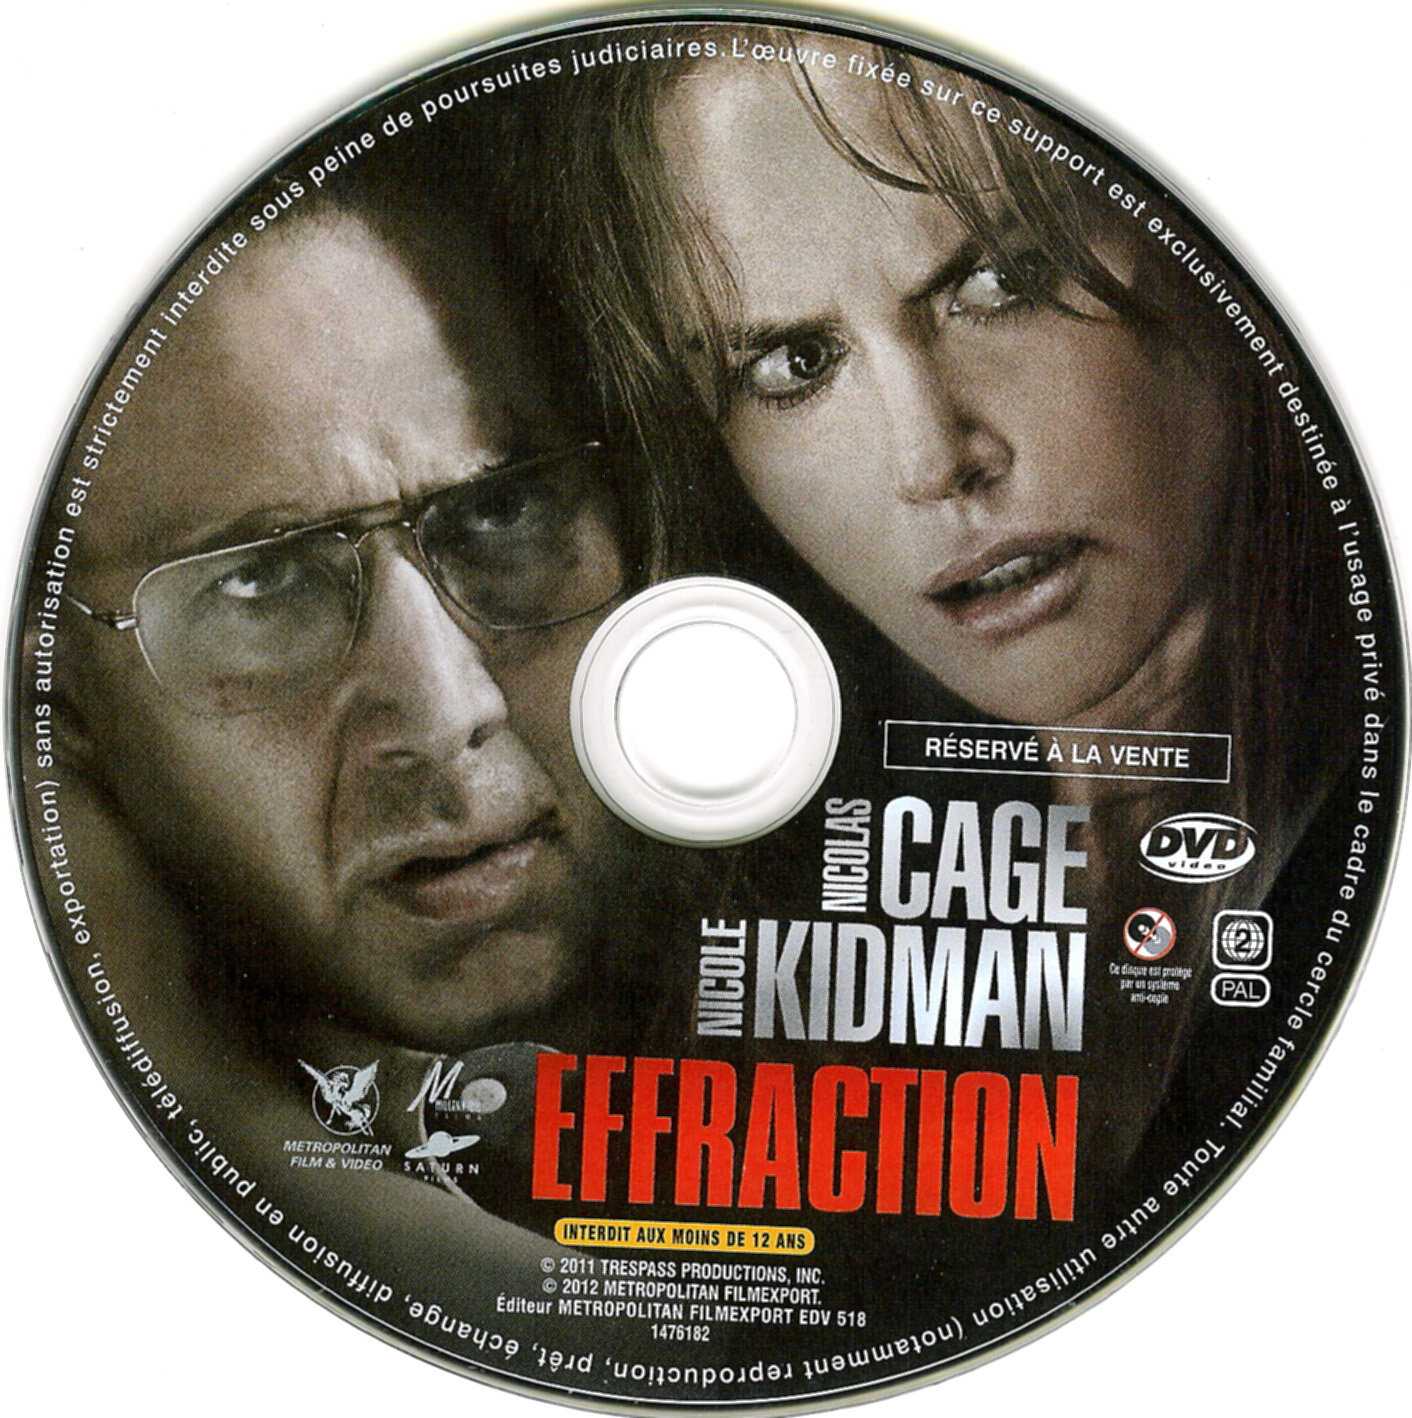 Efrraction